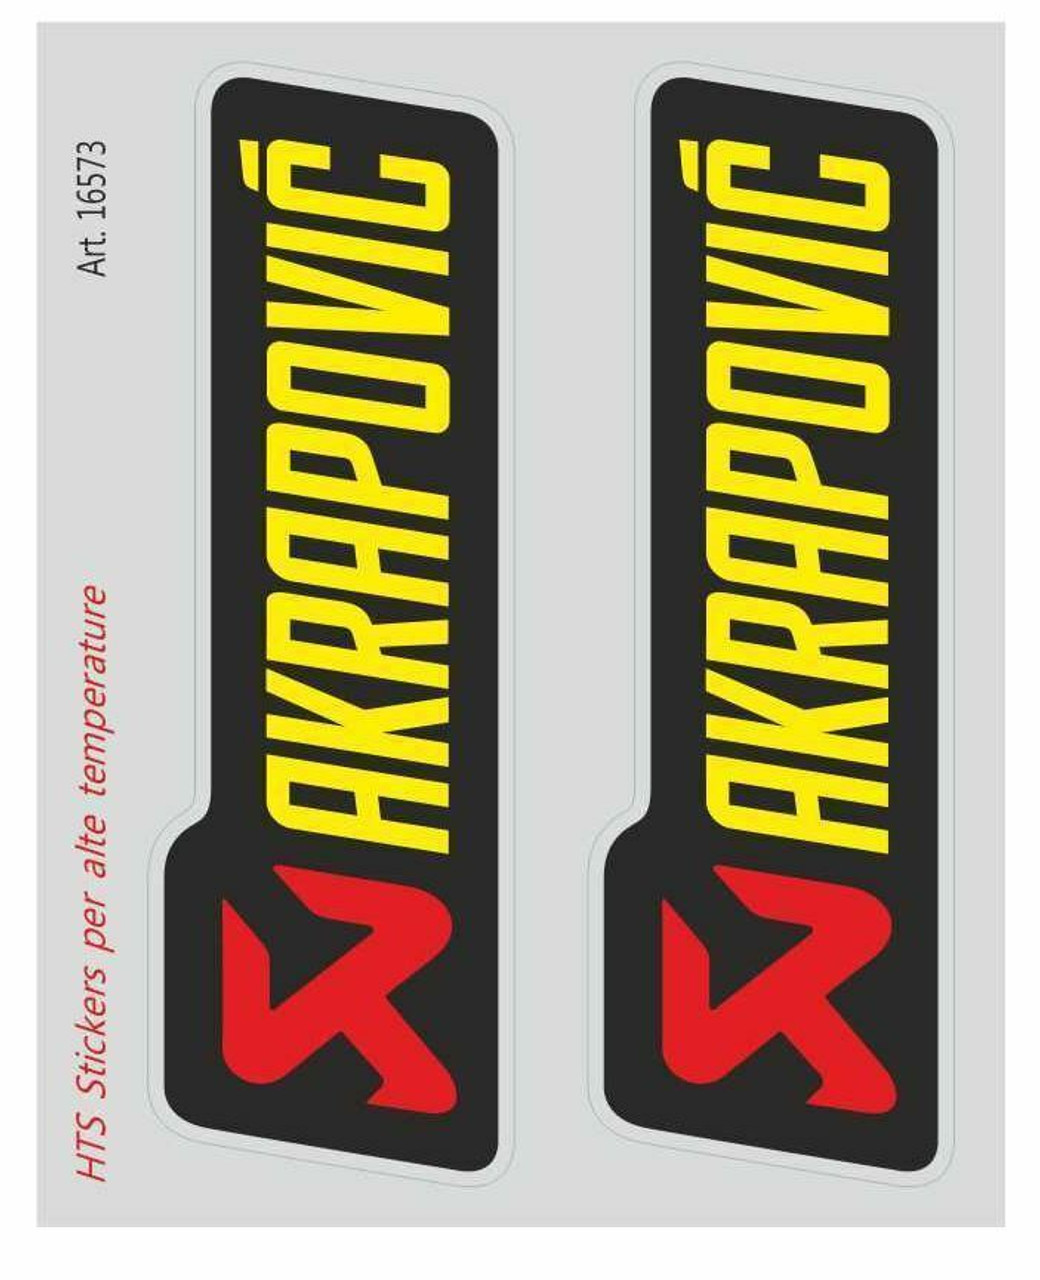 AKRAPOVIC EXHAUST STICKERS SET OF TWO MADE IN ITALY